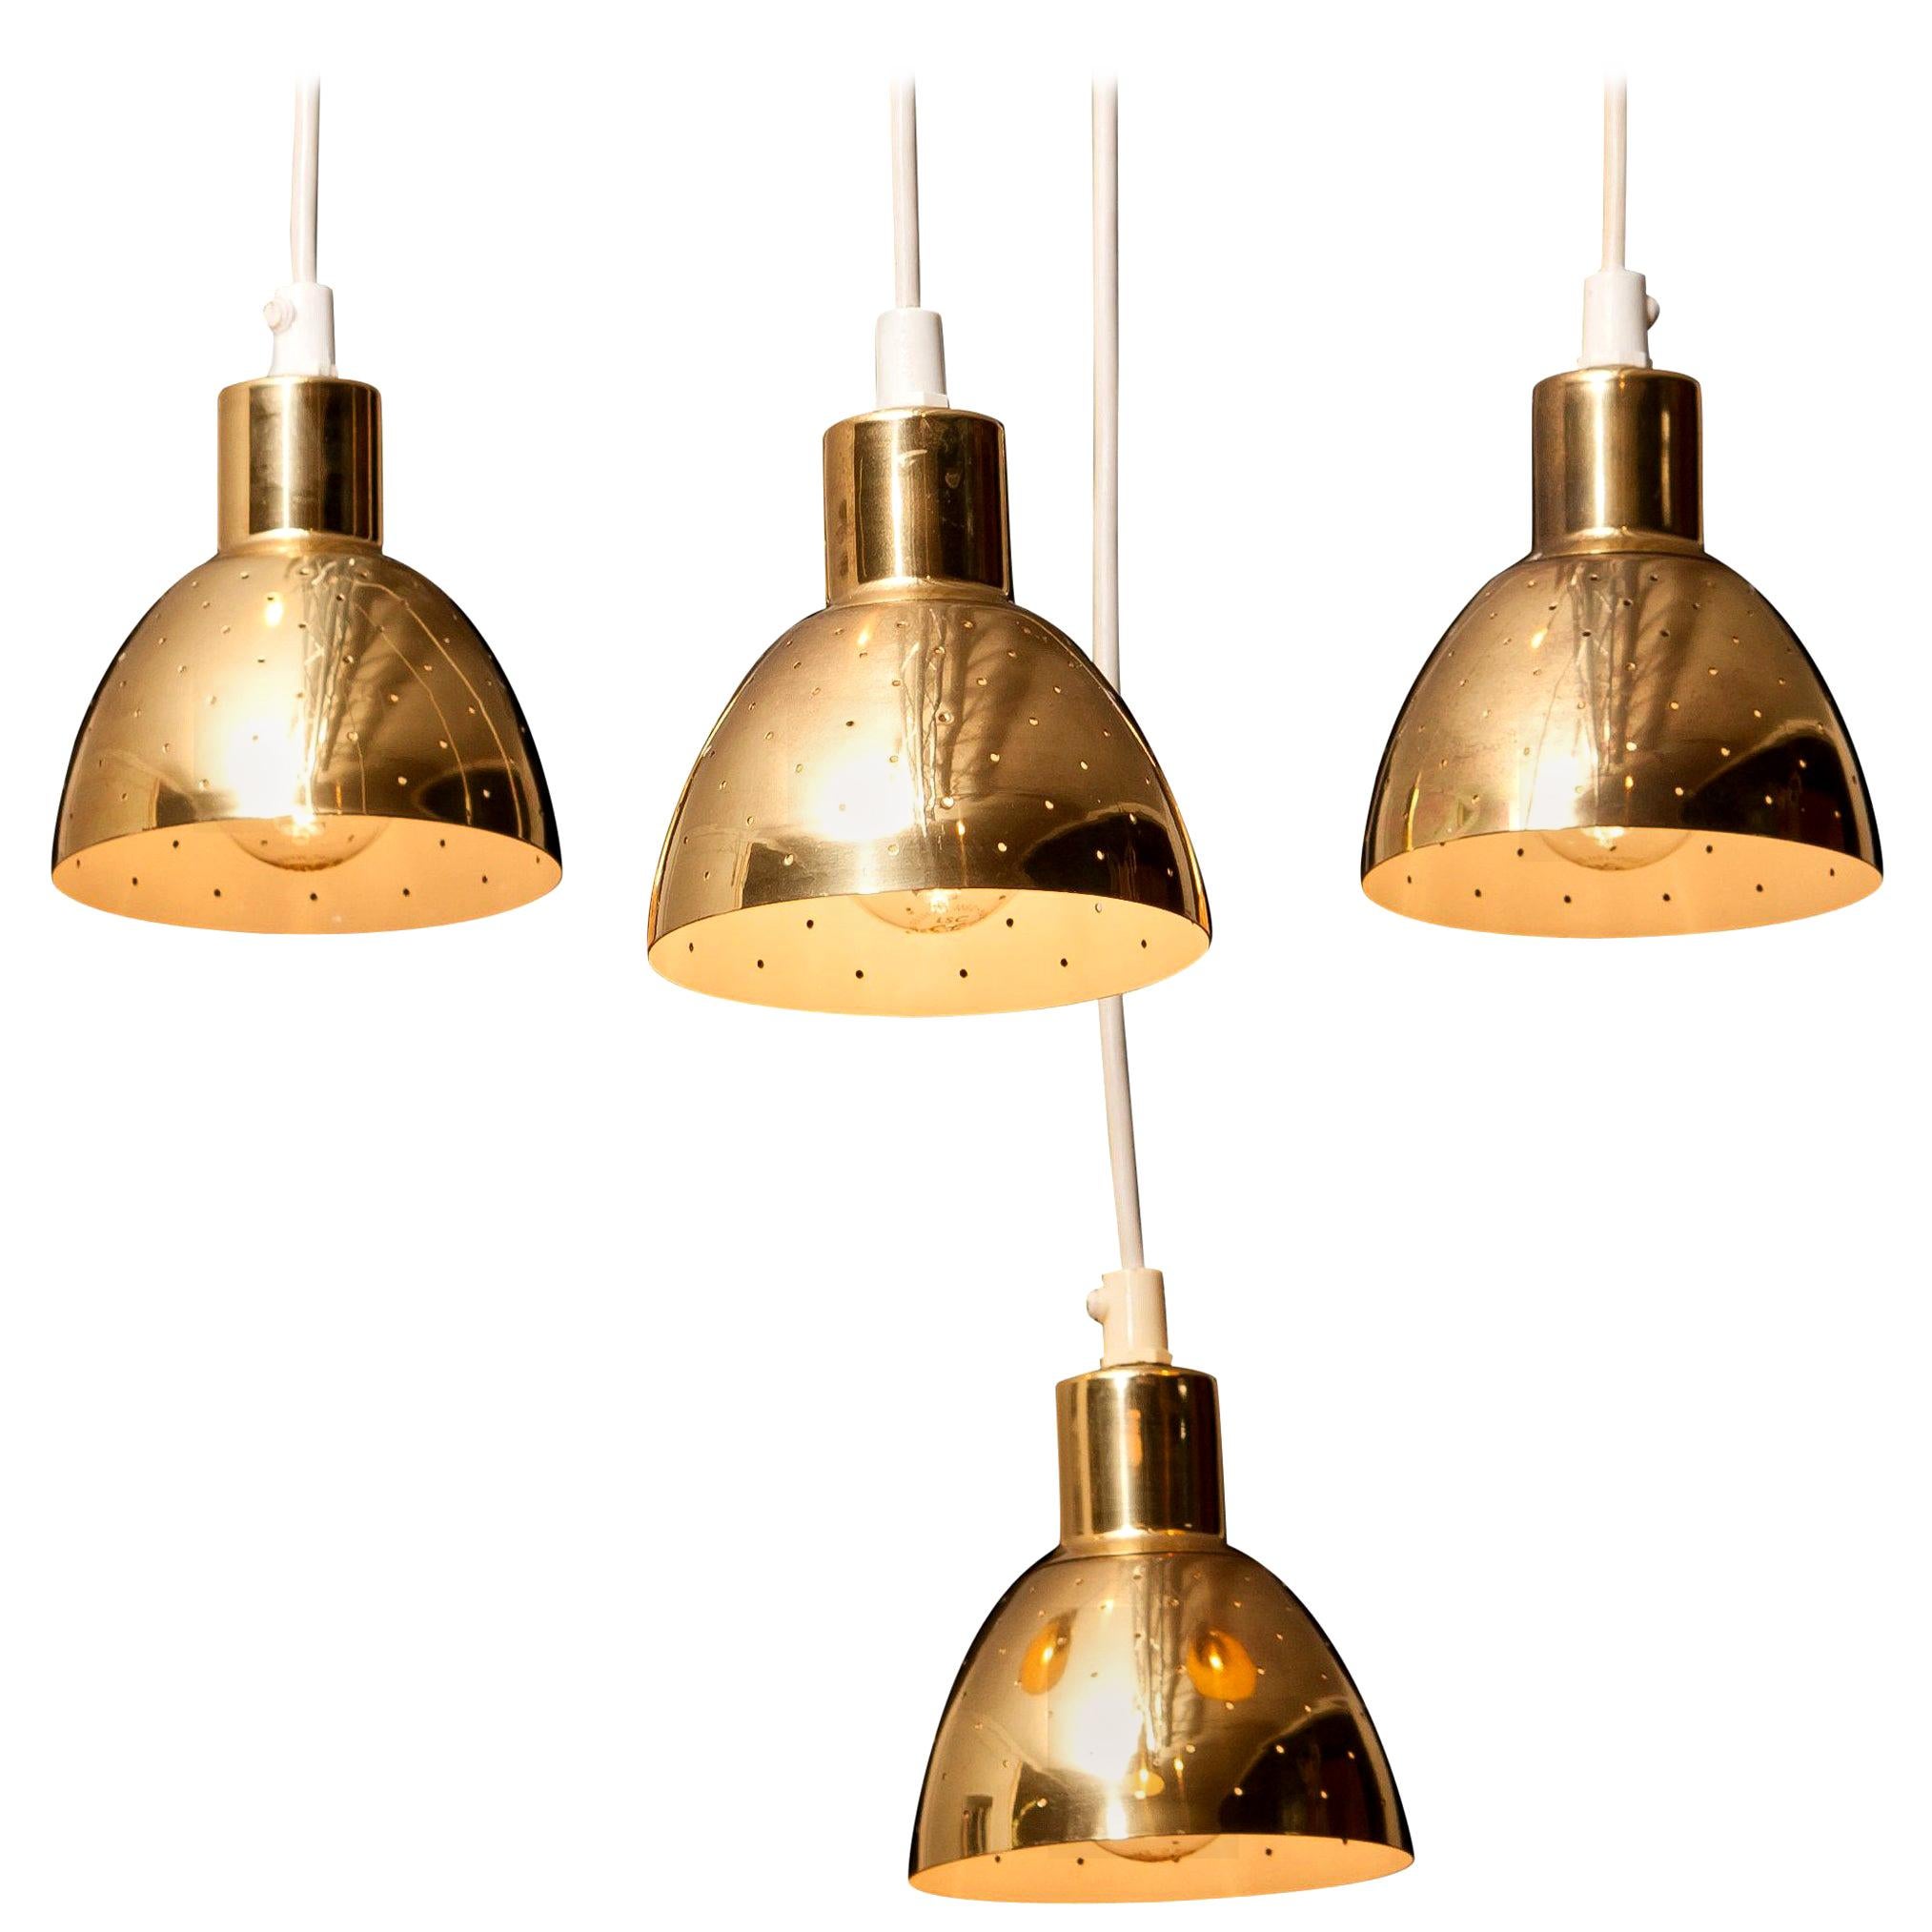 Great set of four brass pendants by Hans-Agne Jakobsson for Markaryd, Sweden.
Each lamp has perforation with gives the light a beautiful shining.
They are in a good and working condition.
Period: 1960s.
Dimensions: H 11 cm, ø 11 cm.